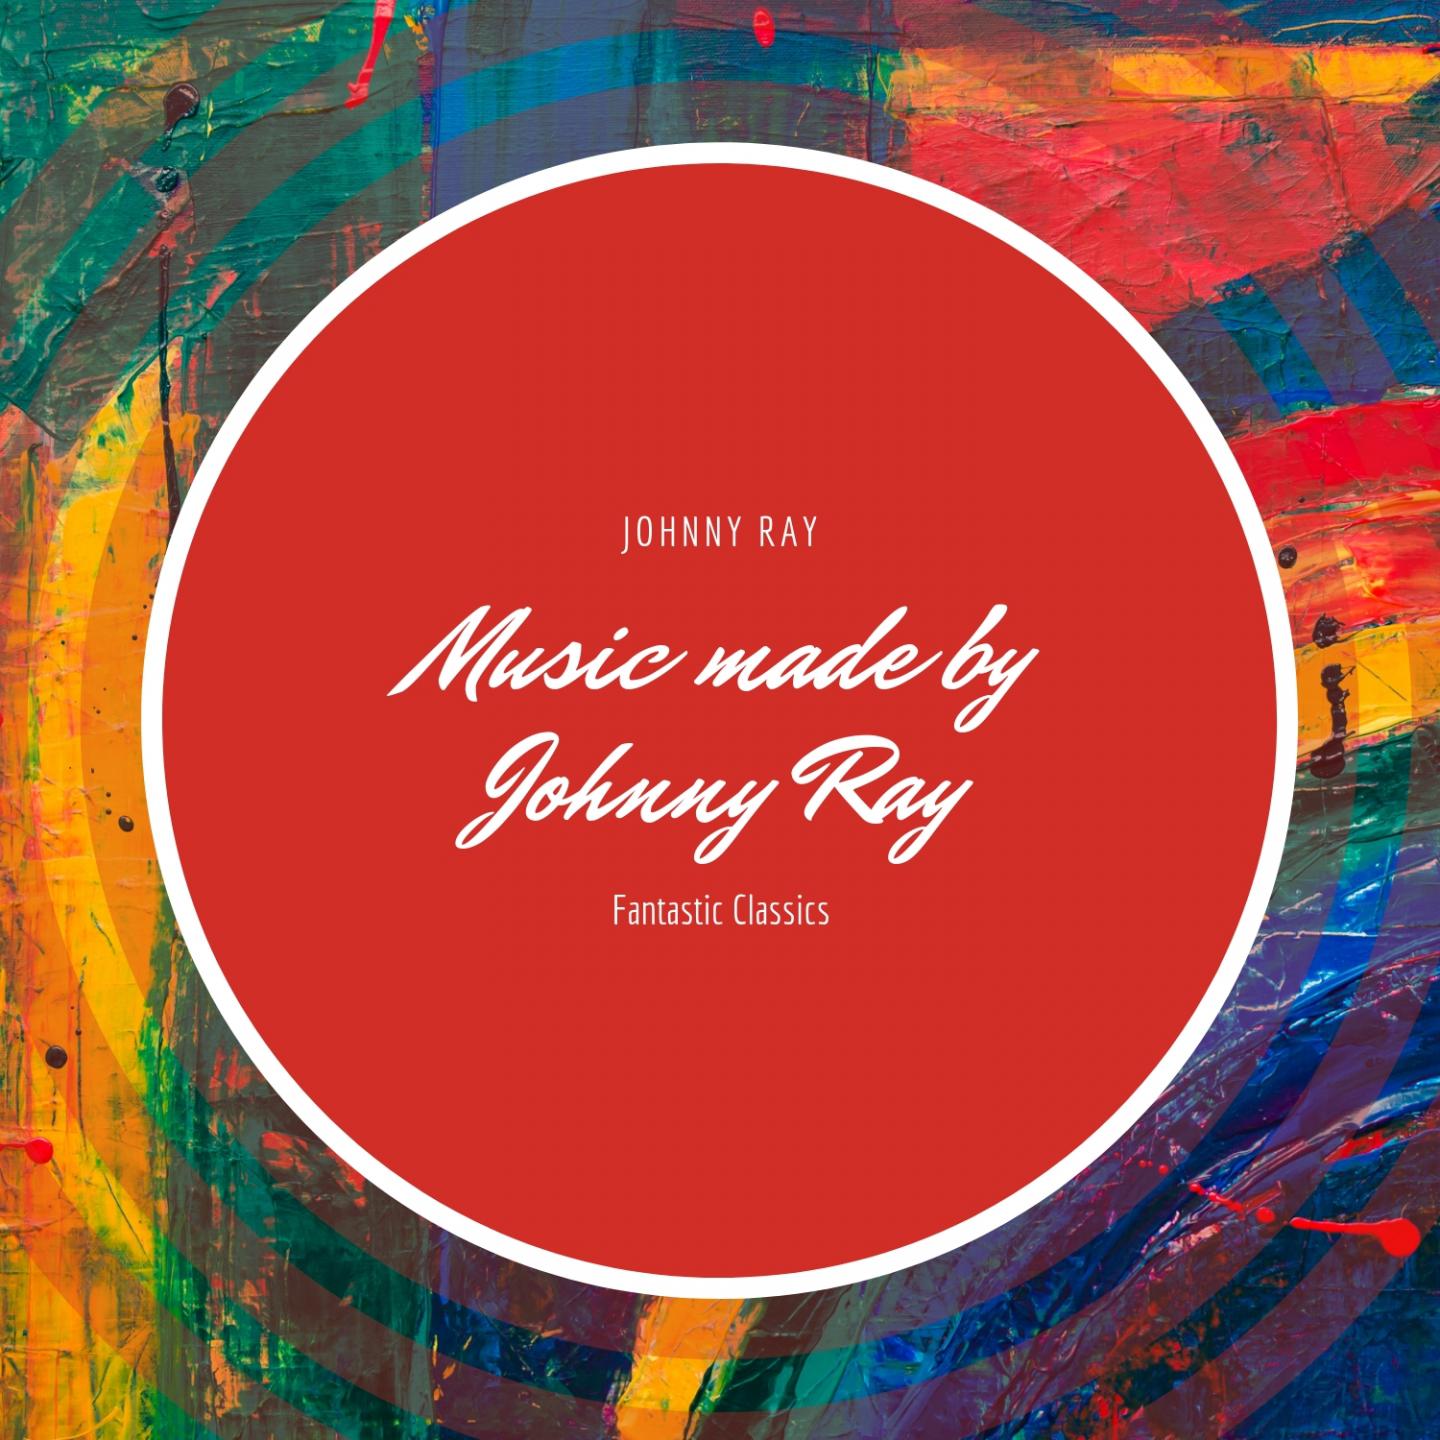 Music made by Johnny Ray